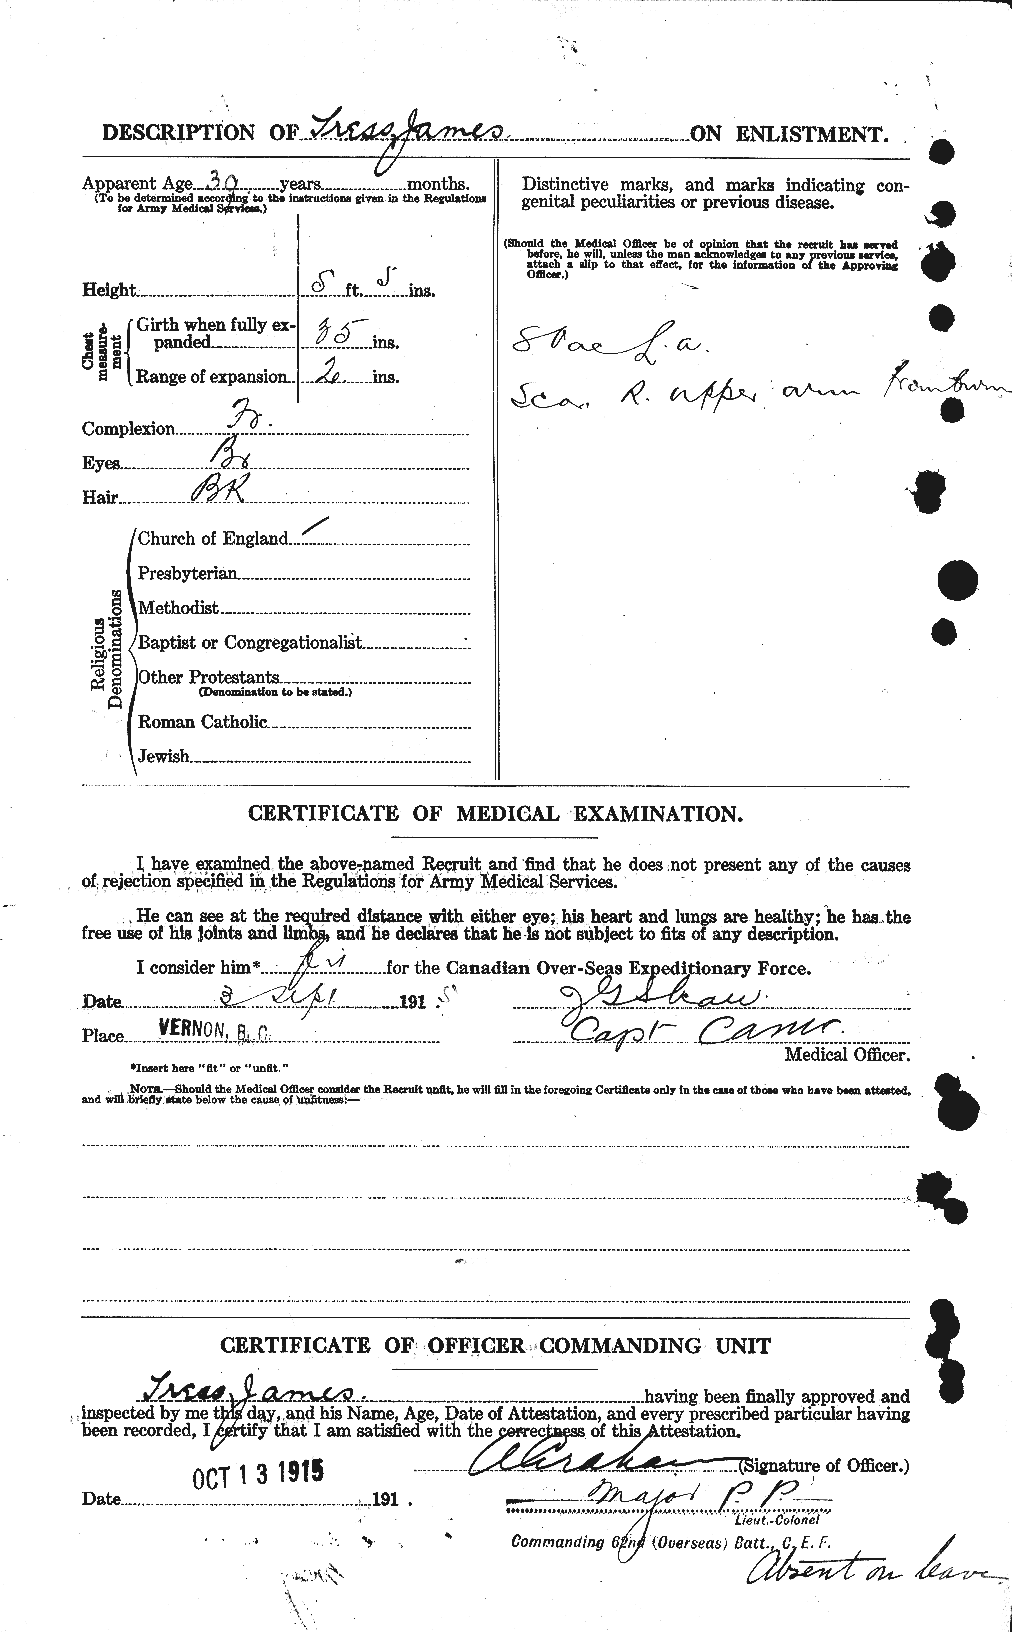 Personnel Records of the First World War - CEF 638589b